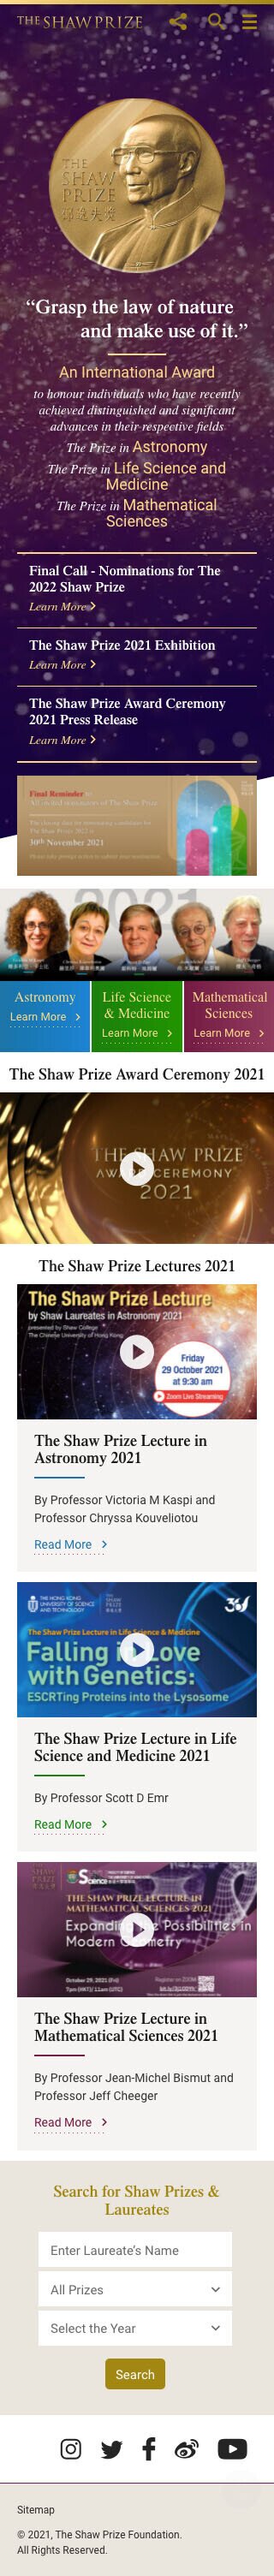 The Shaw Prize Mobile Homepage